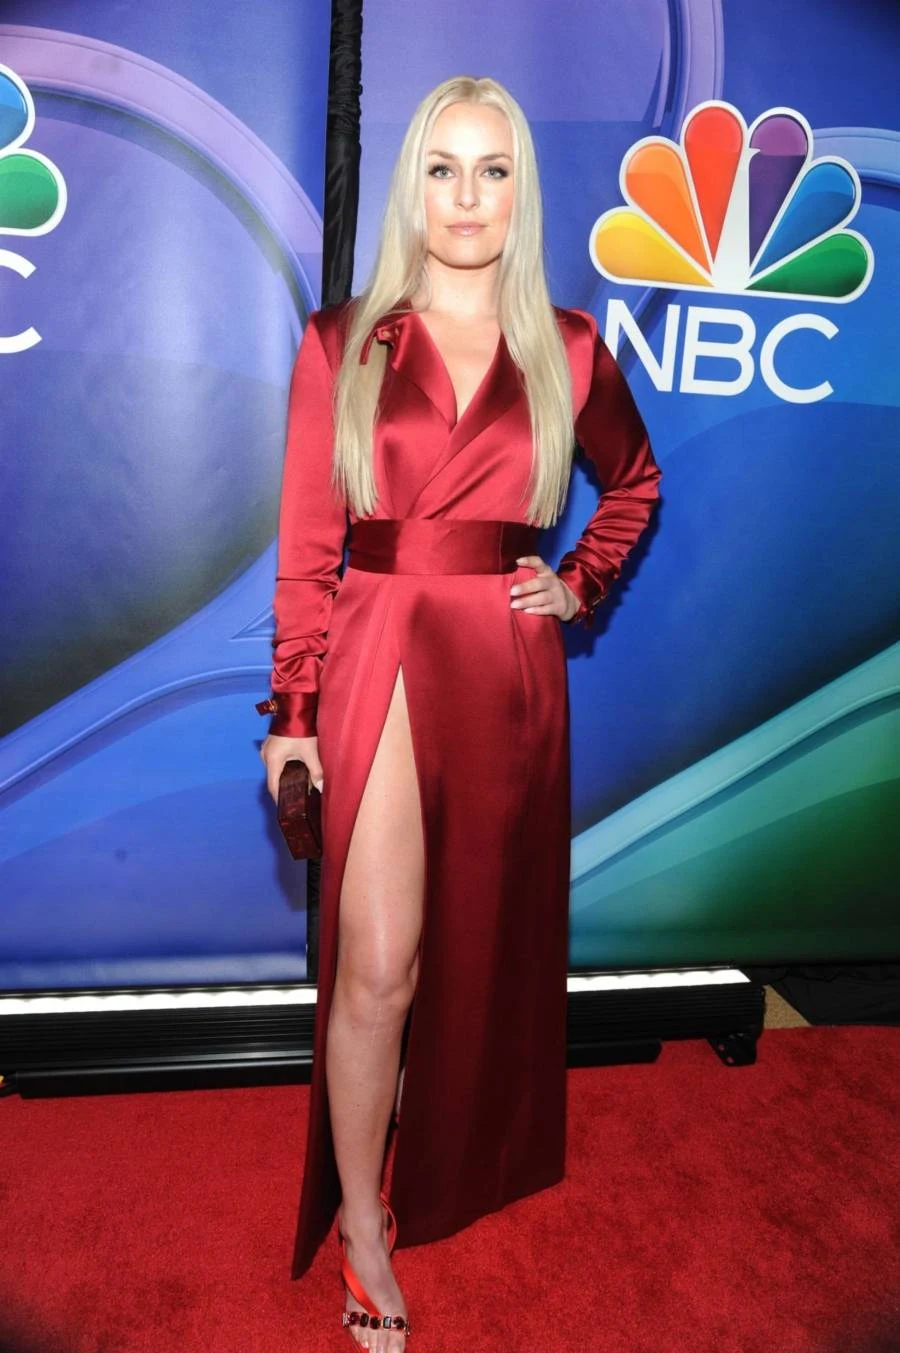 Lindsey Vonn At NBCUniversal Upfront Presentation in NYC